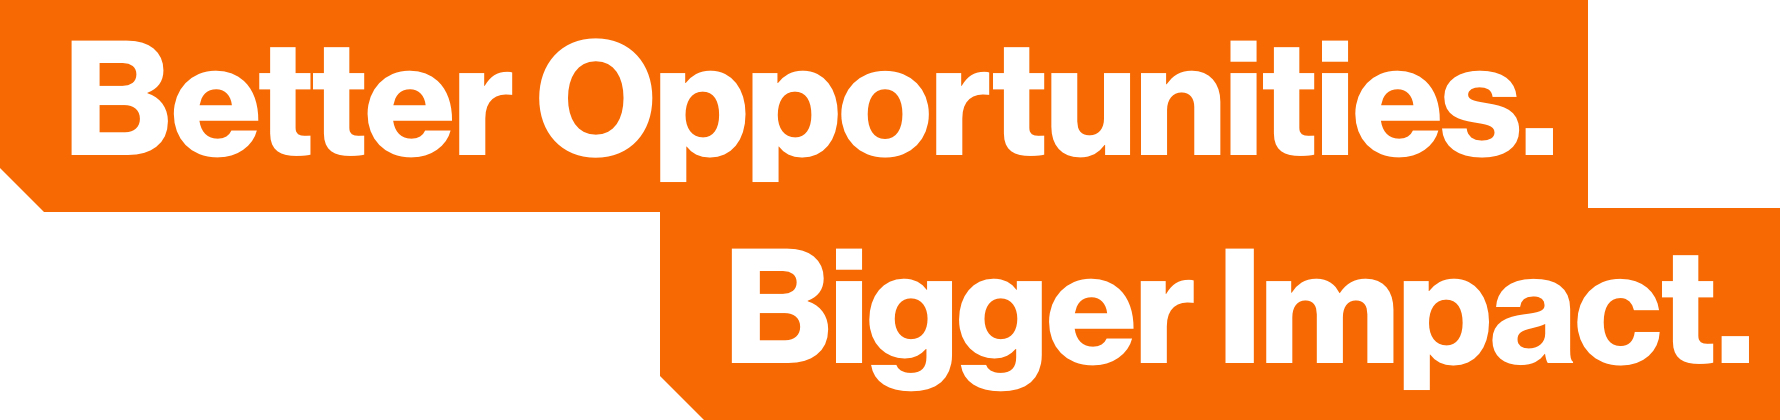 Graphic text that says Better Opportunities. Bigger Impact.